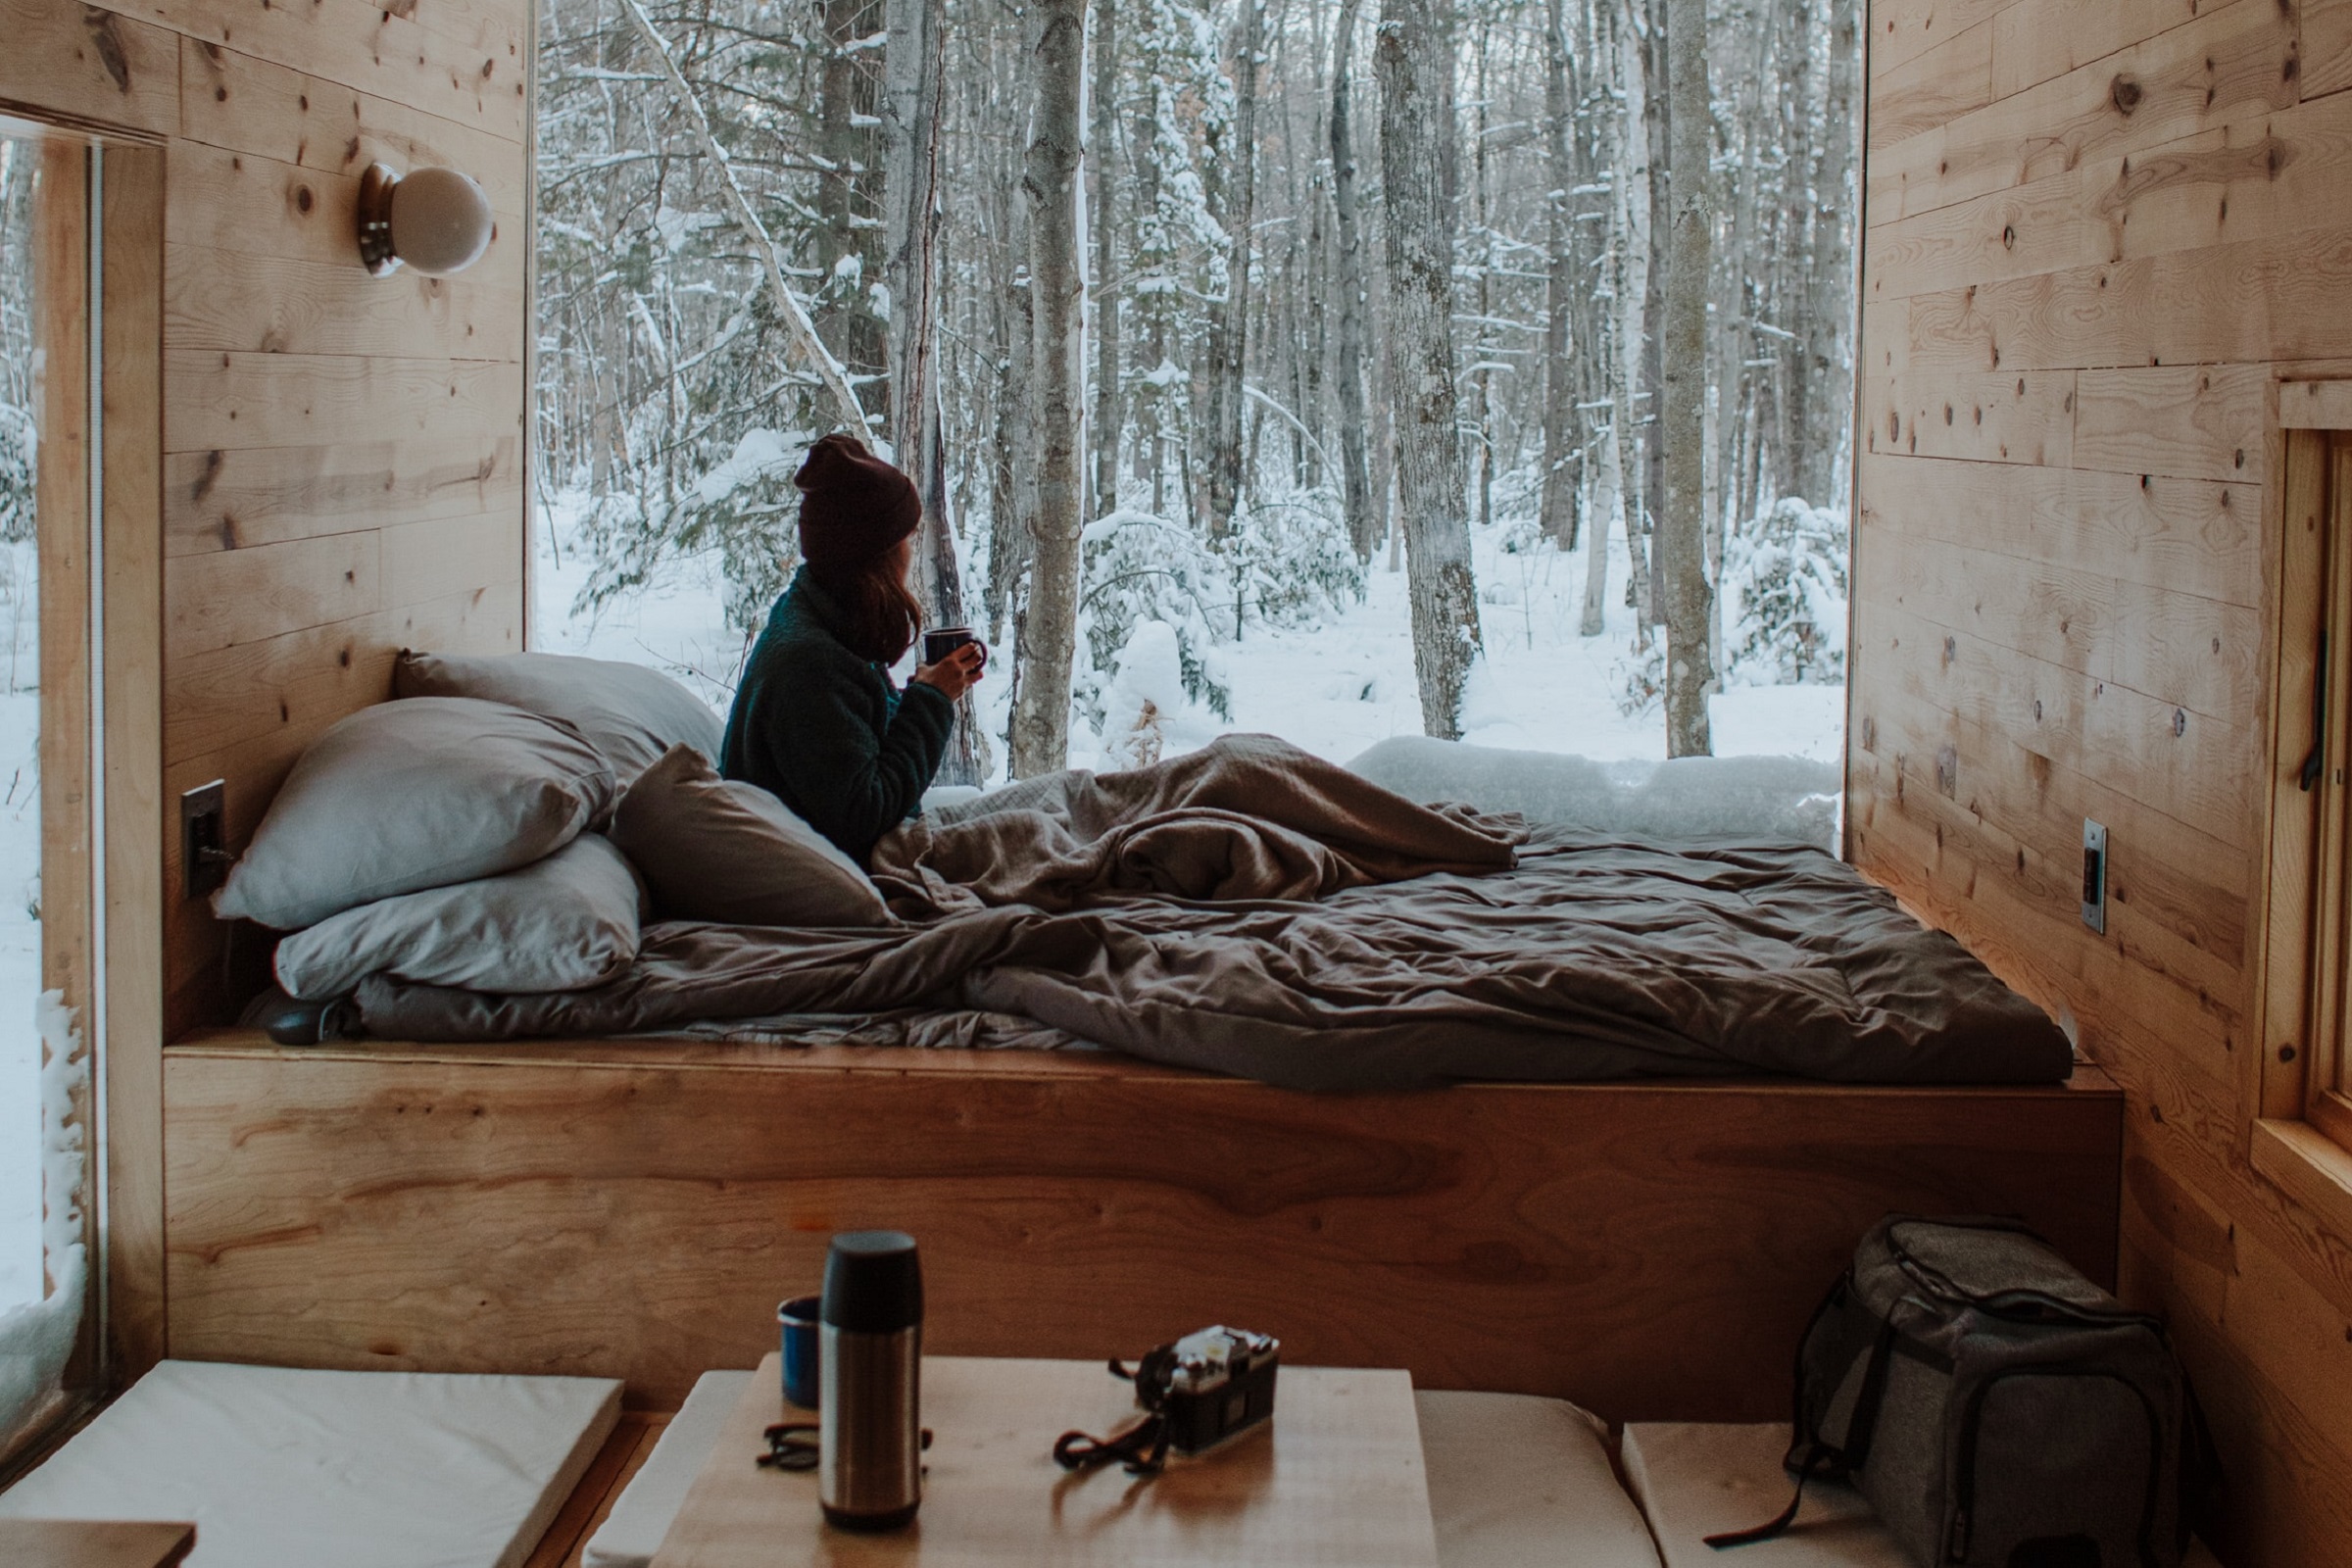 Person sits on a bed and looks out at snowy woods through a large window.